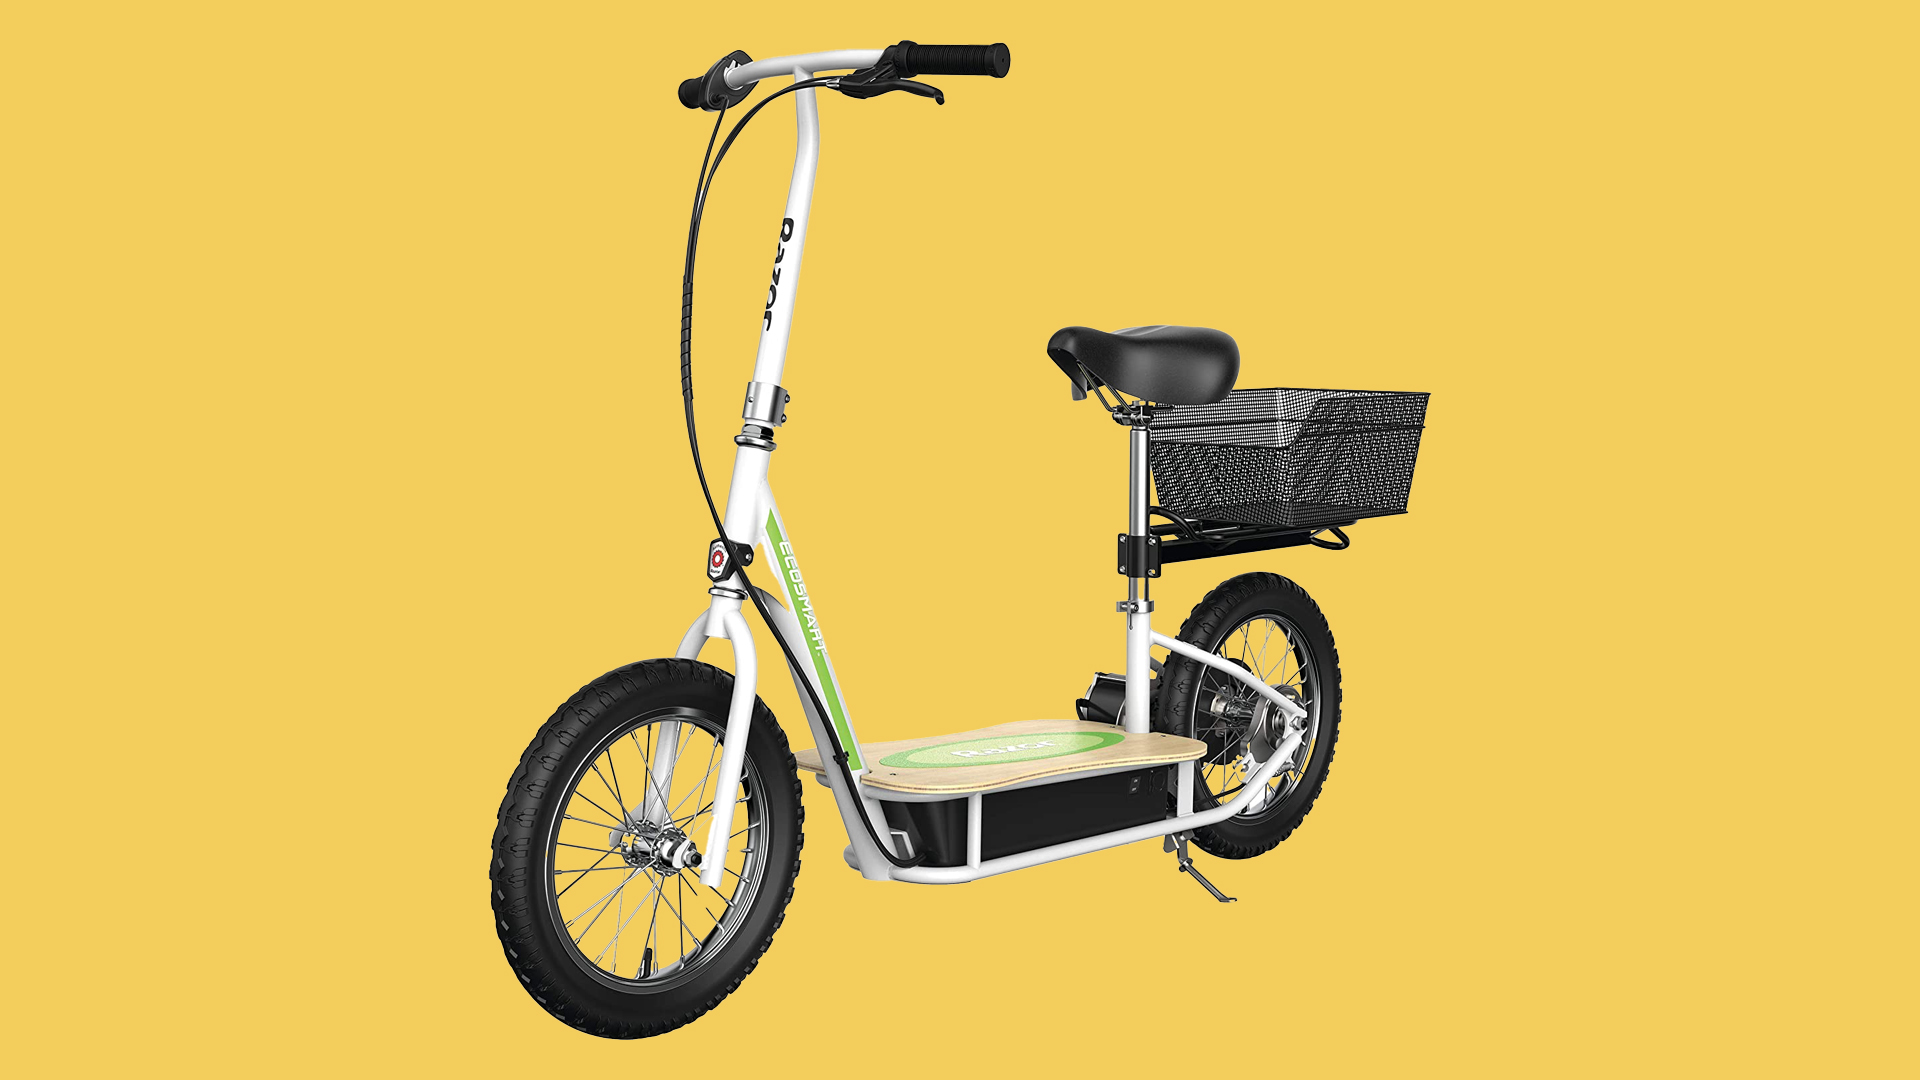 The Best Electric Scooters With Seats: Stay Classy and Ride in Style